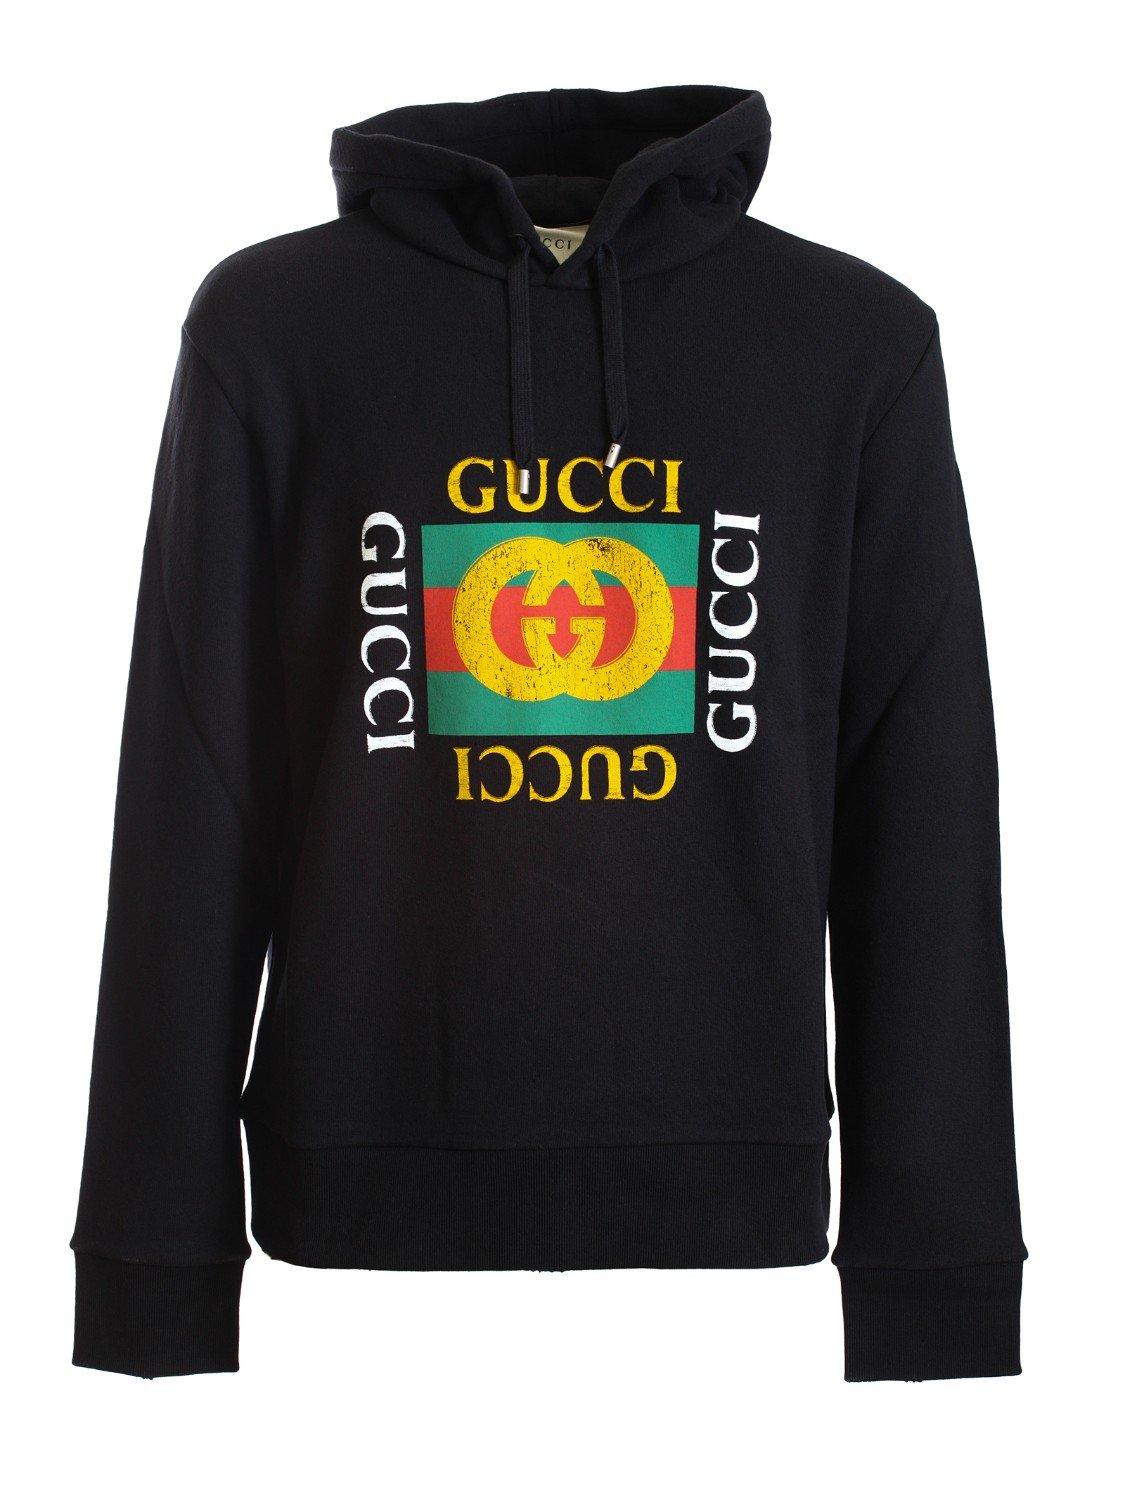 Gucci Cotton Sweatshirt With Logo Fw19 in Black for Men - Lyst